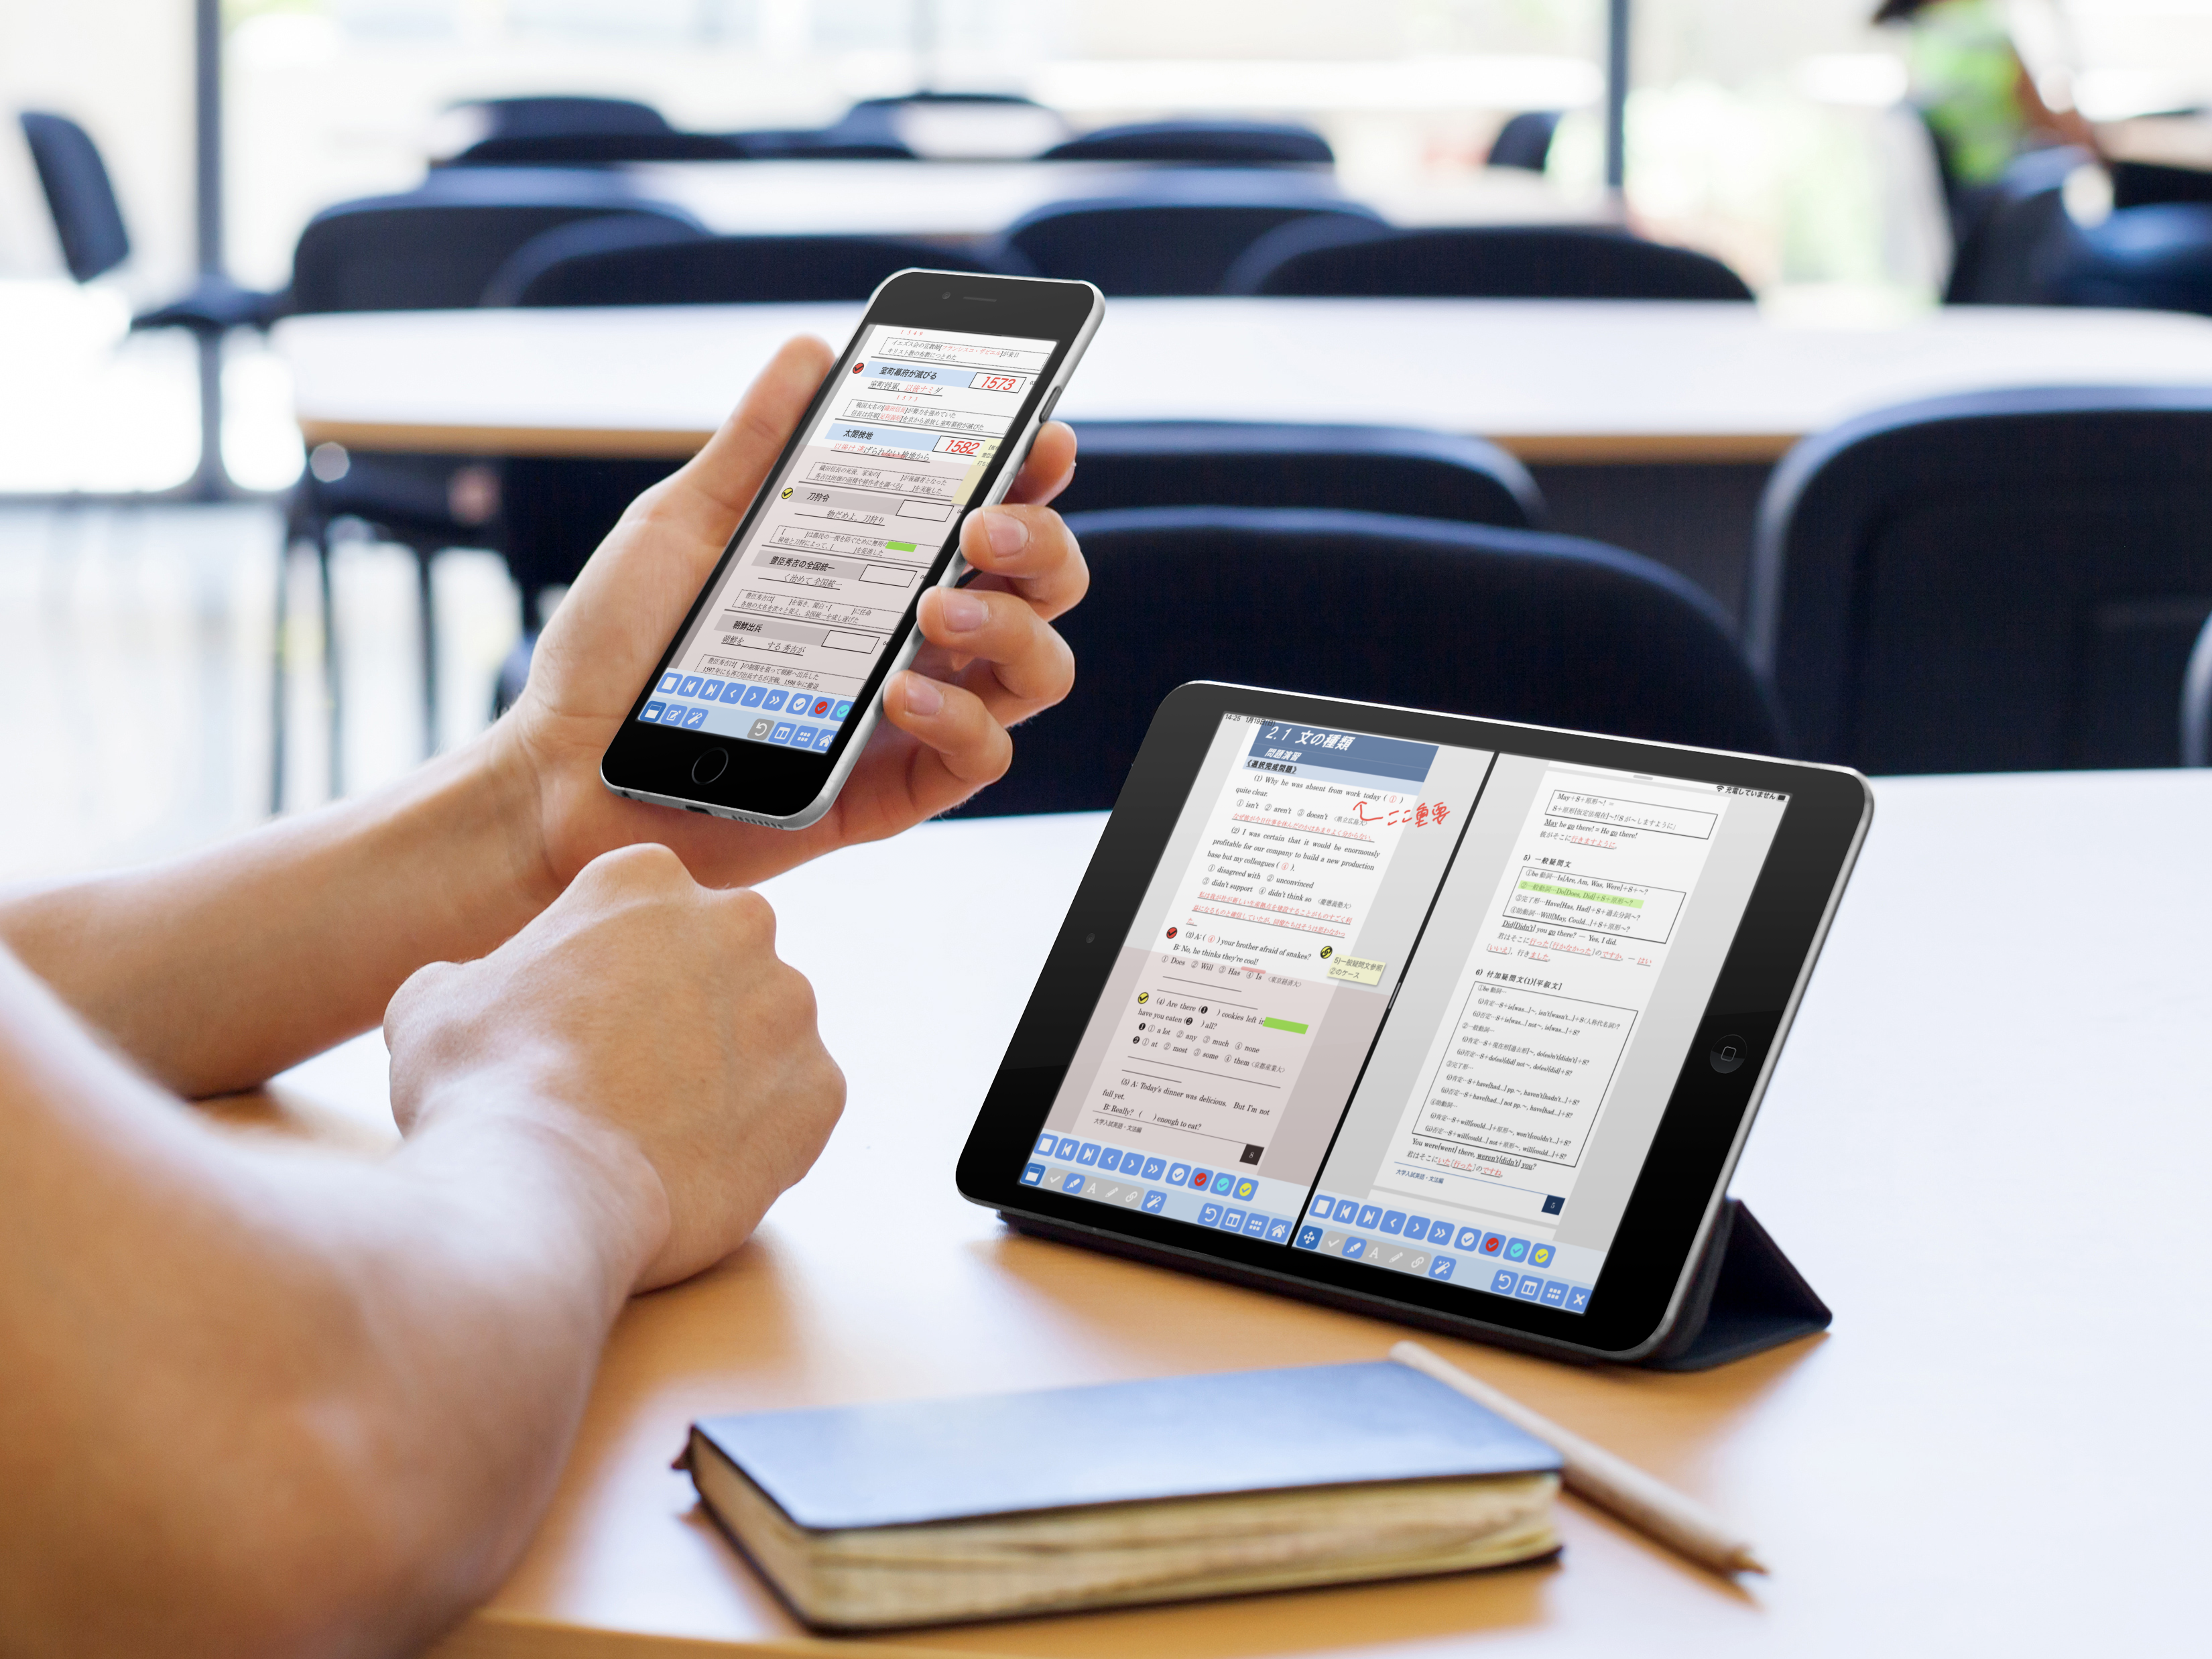 female-student-at-a-library-using-an-iphone-6-and-an-ipad-mockup-a5668.png